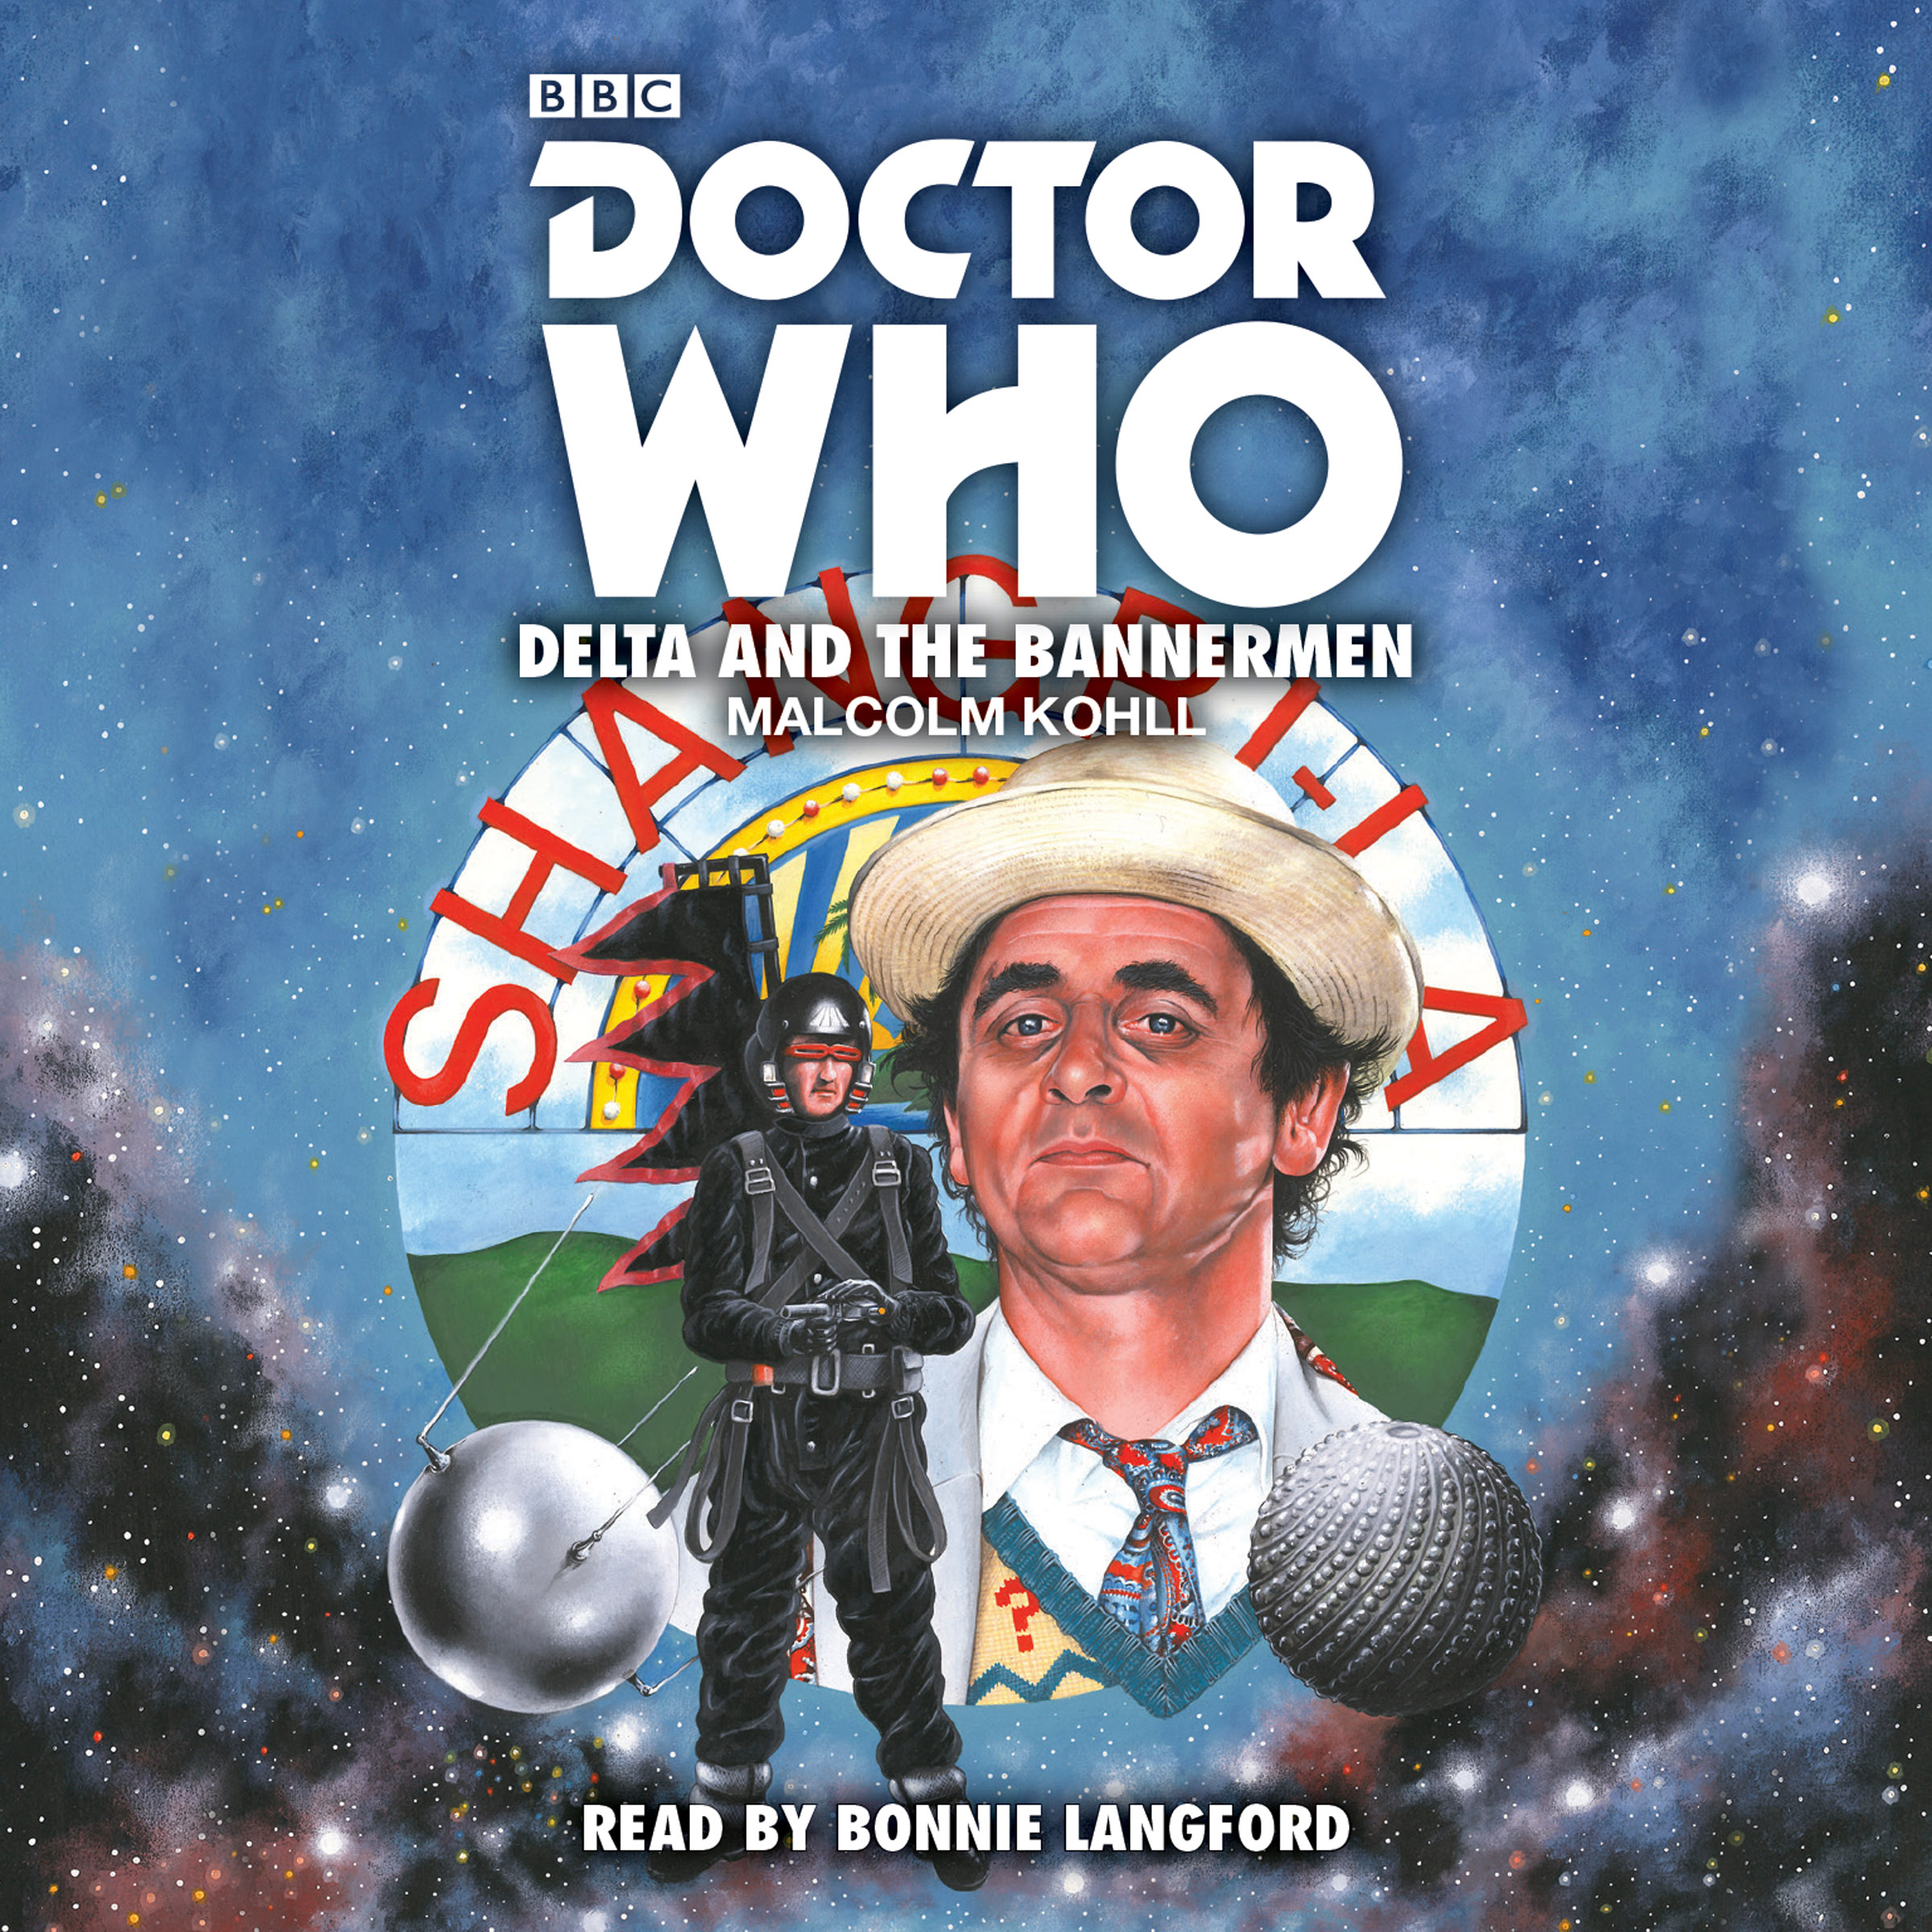 Delta and Bannerman cover art